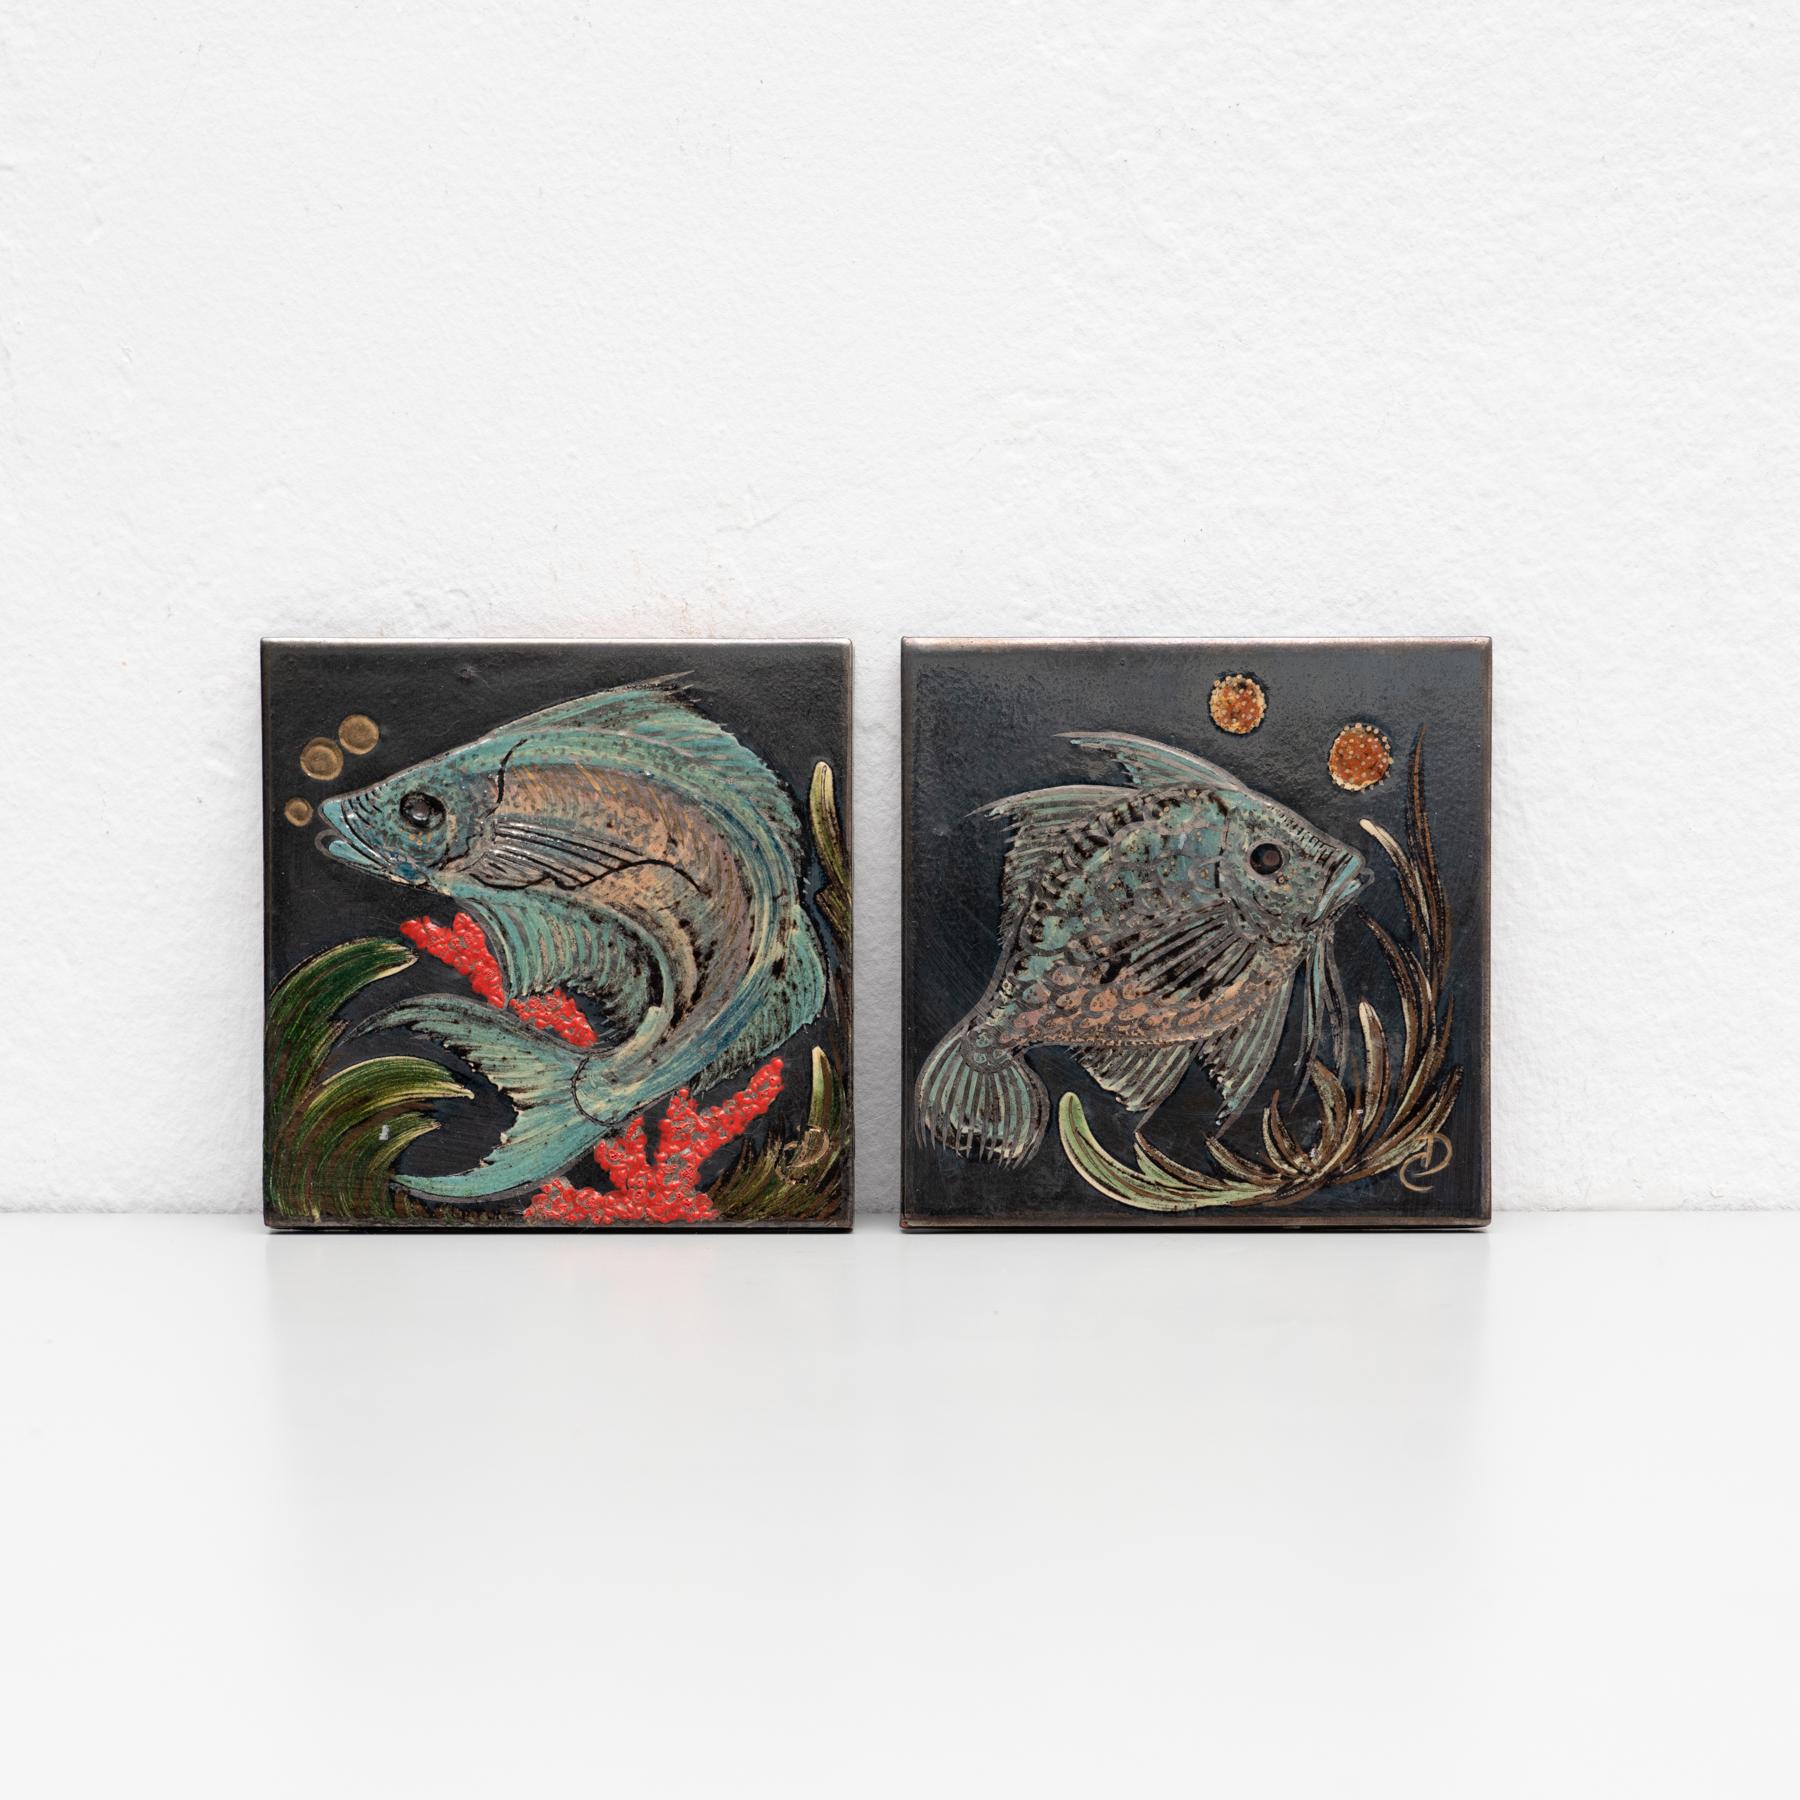 Ceramic hand painted artwork of a fish by Catalan artist Diaz Costa, circa 1960.
Signed.

In original condition, with minor wear consistent of age and use, preserving a beautiul patina.